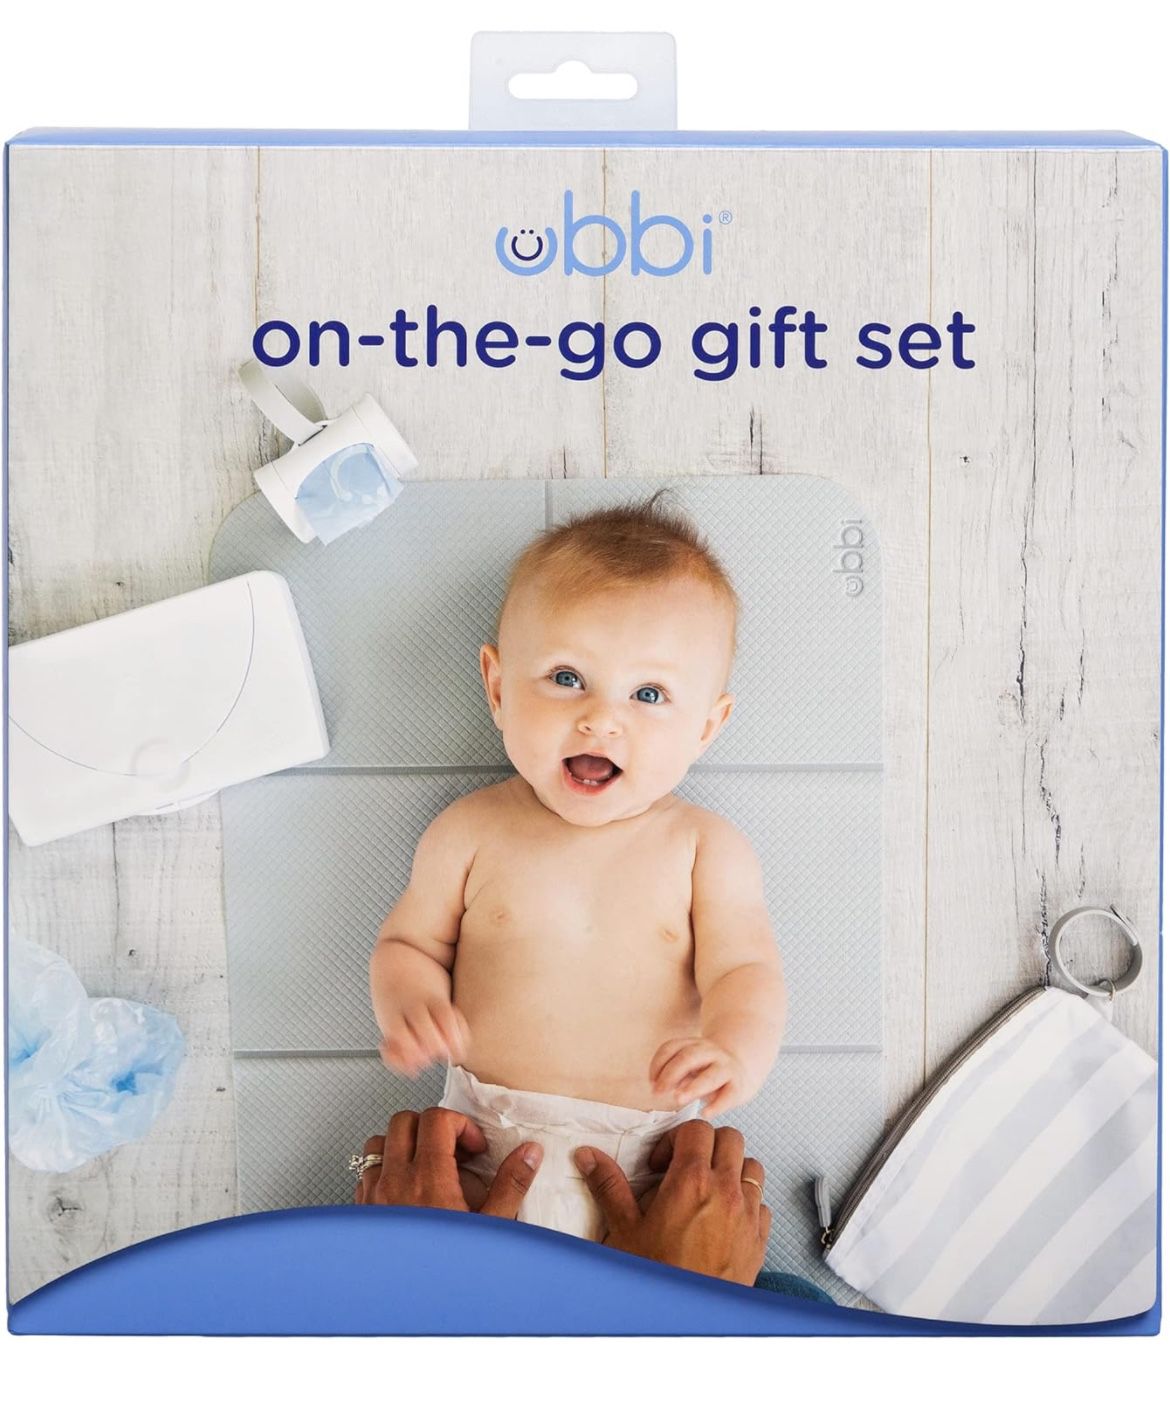 Ubbi On-the-go Gift Set, Diaper Changing